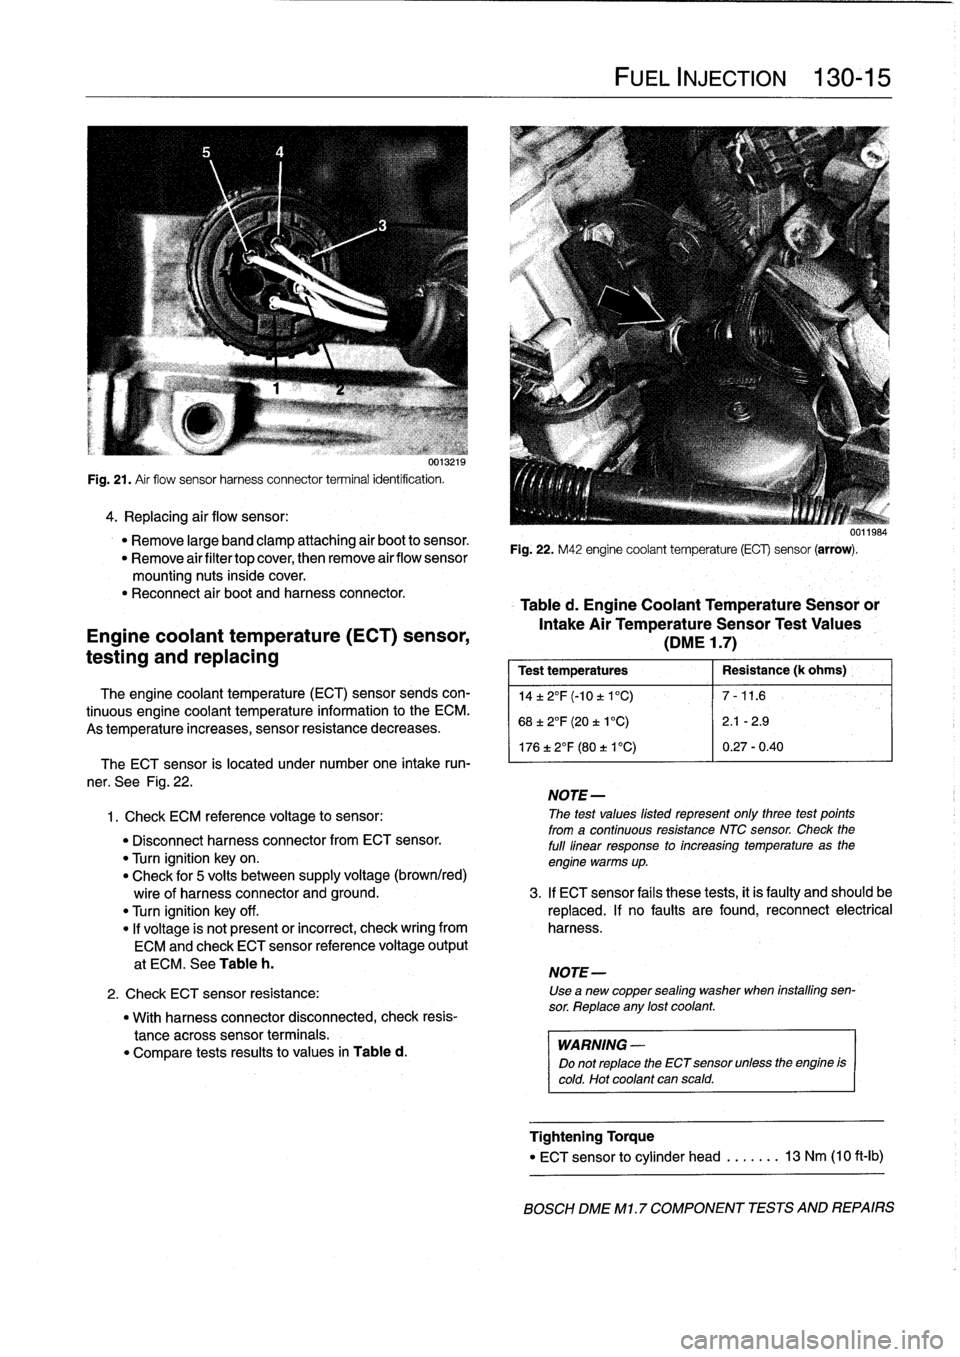 BMW 323i 1993 E36 Owners Guide u0
I
.[
Ia

Fig
.
21
.
Air
flow
sensor
harness
connector
terminal
identification
.

4
.
Replacing
air
flow
sensor
:

"
Remove
large
band
clamp
attaching
air
boot
to
sensor
.

"
Remove
airfiltertop
cov